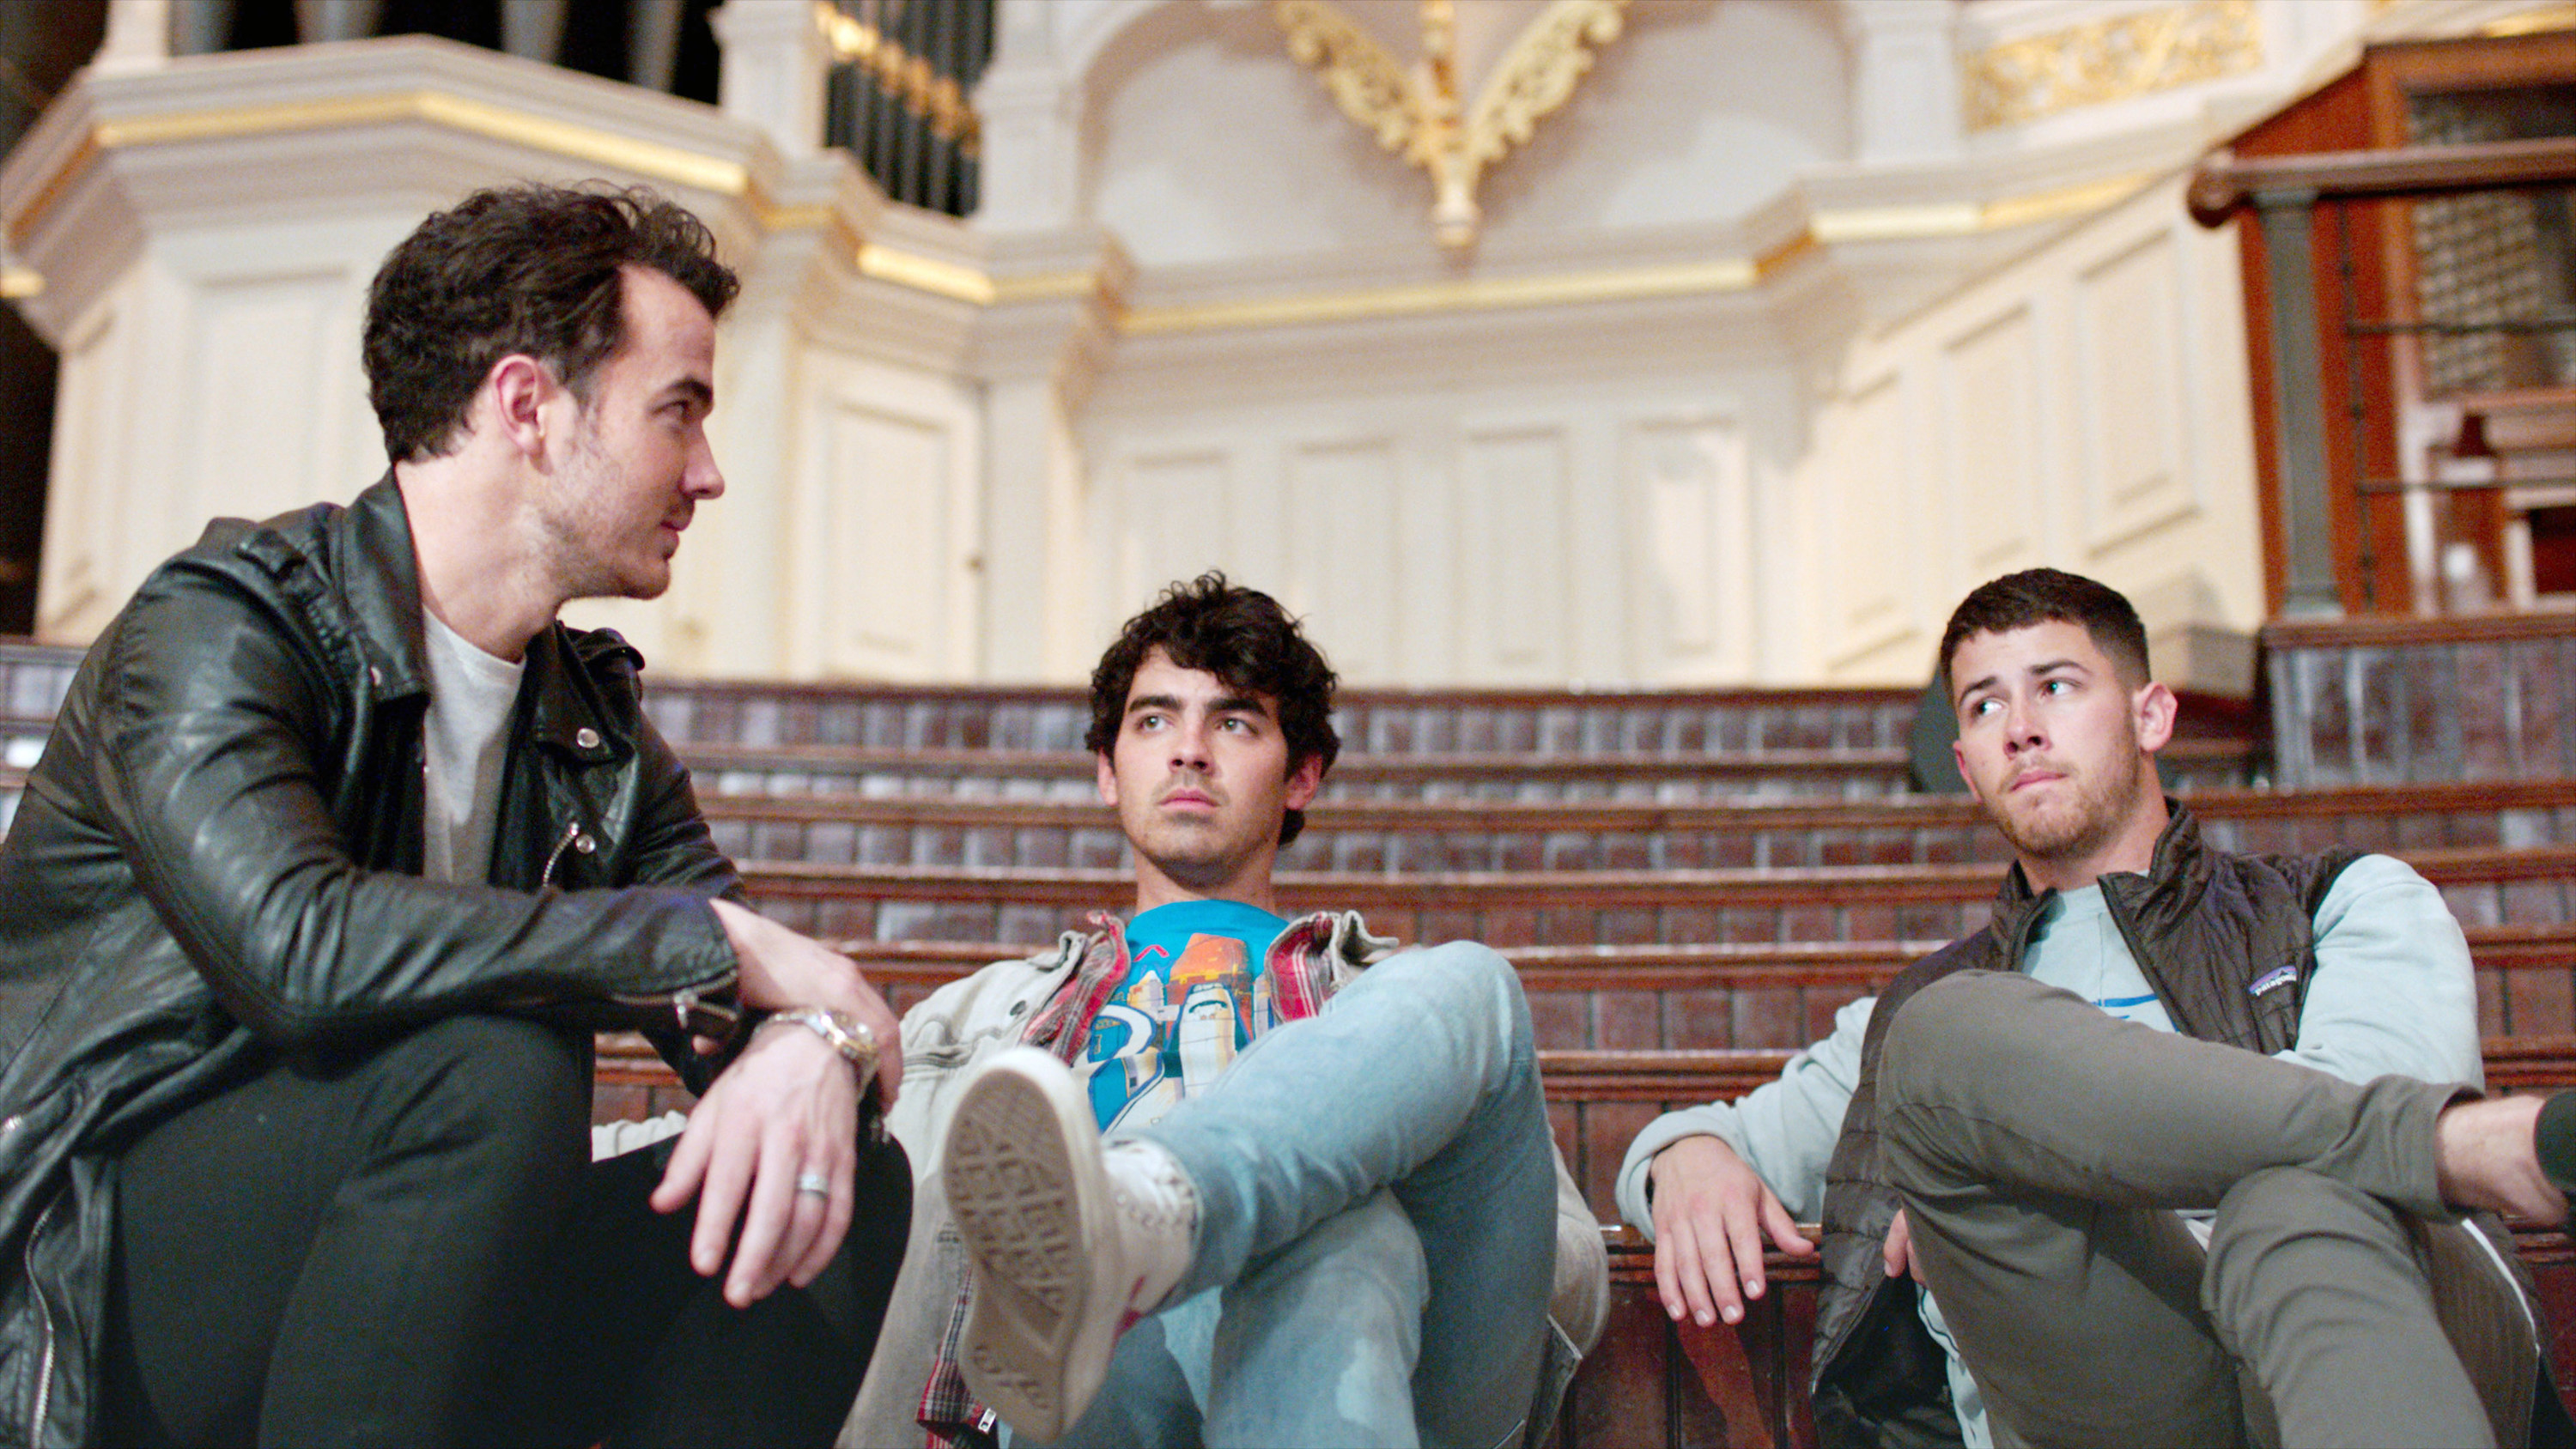 The Jonas Brothers sit on steps together